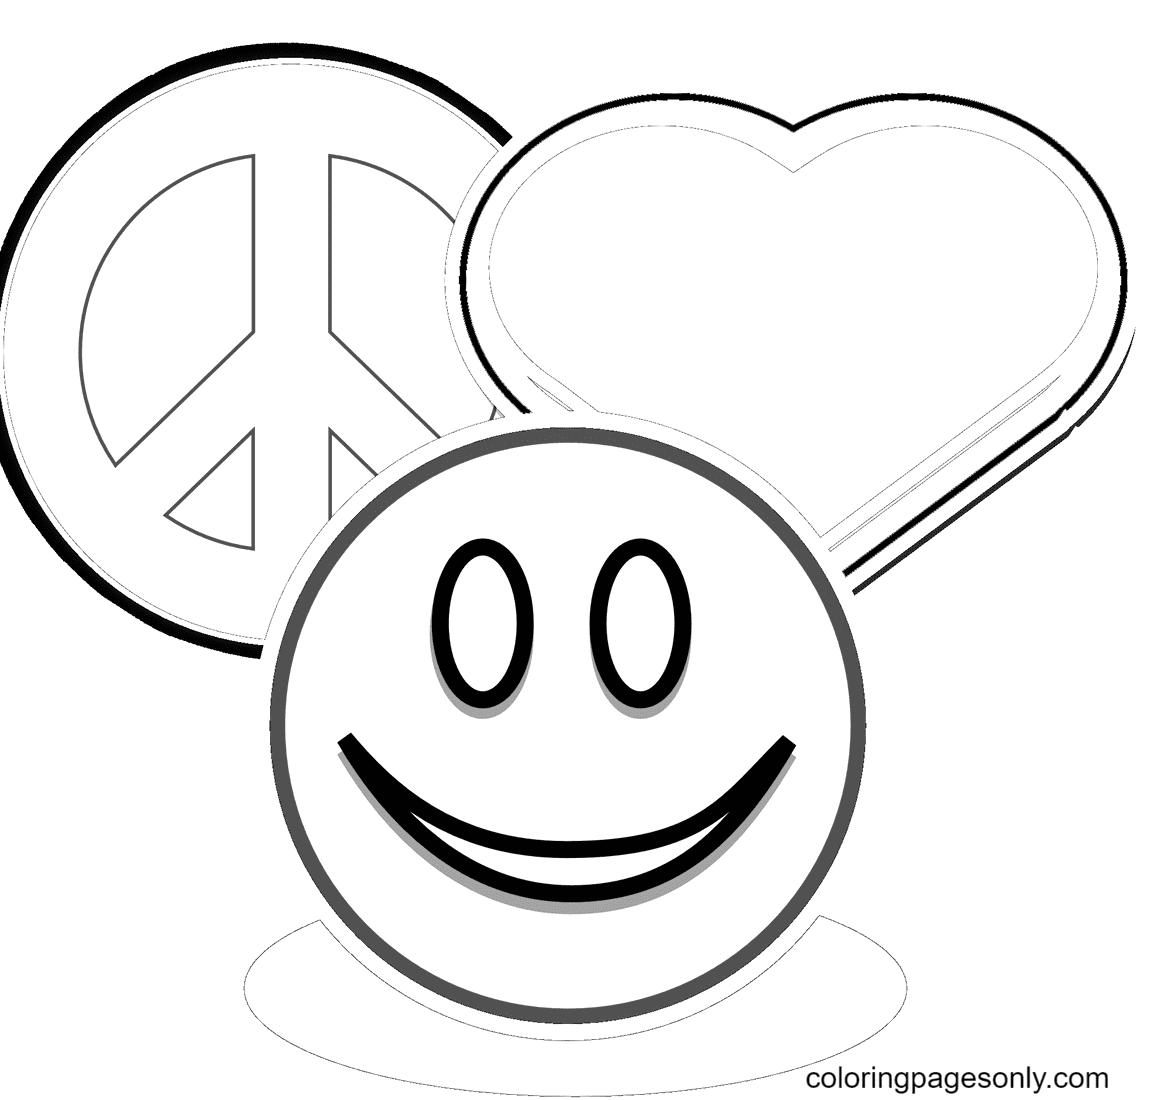 Printable World Peace Coloring Page